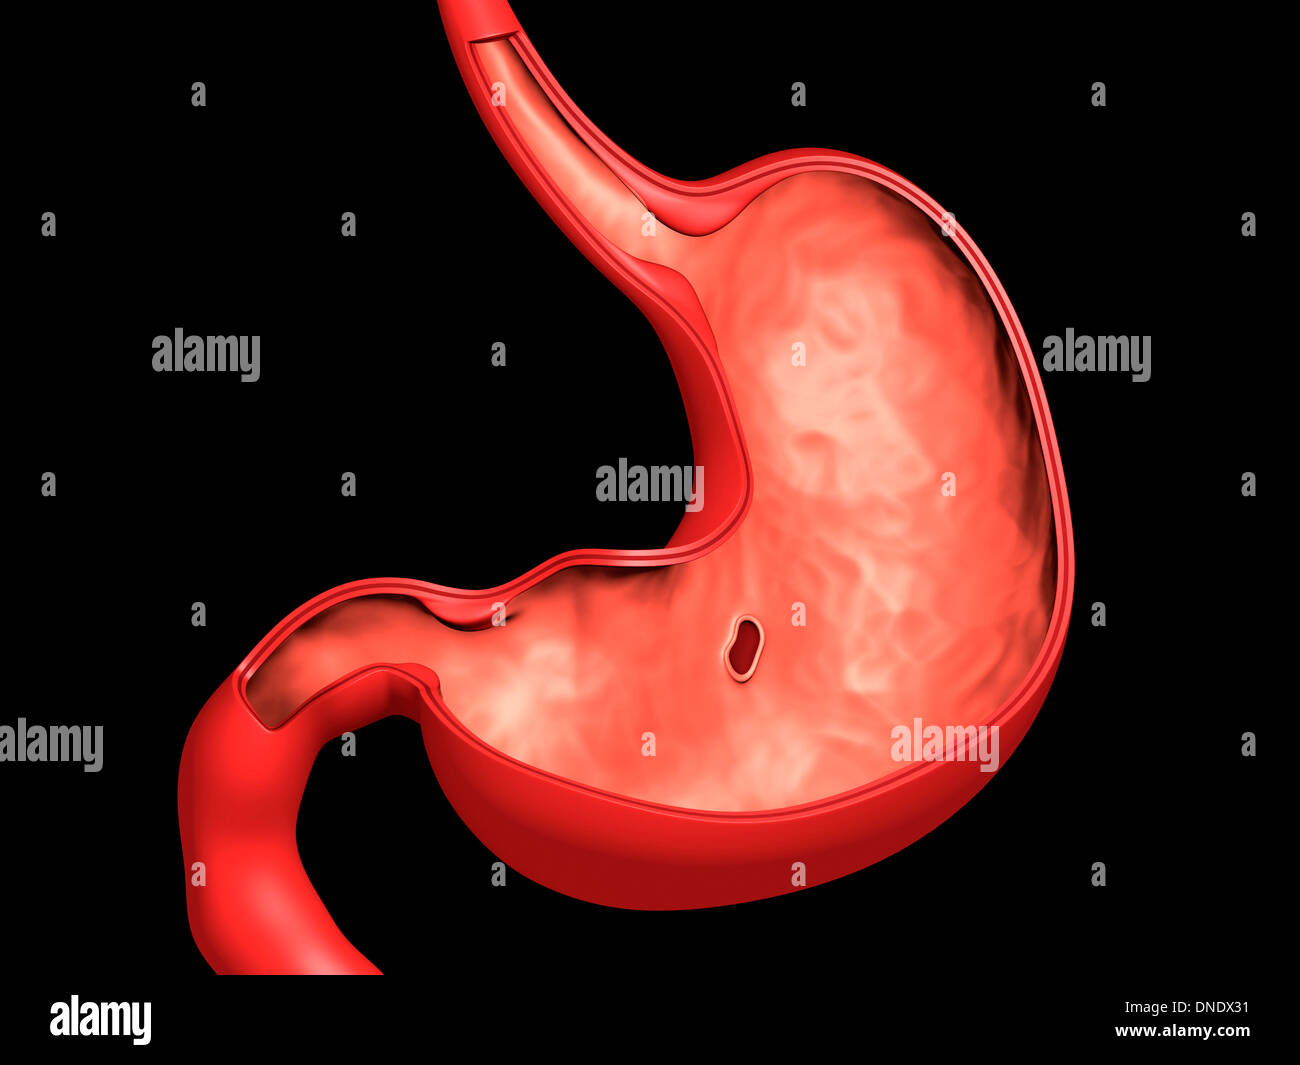 Conceptual image of peptic ulcer in human stomach. Stock Photo